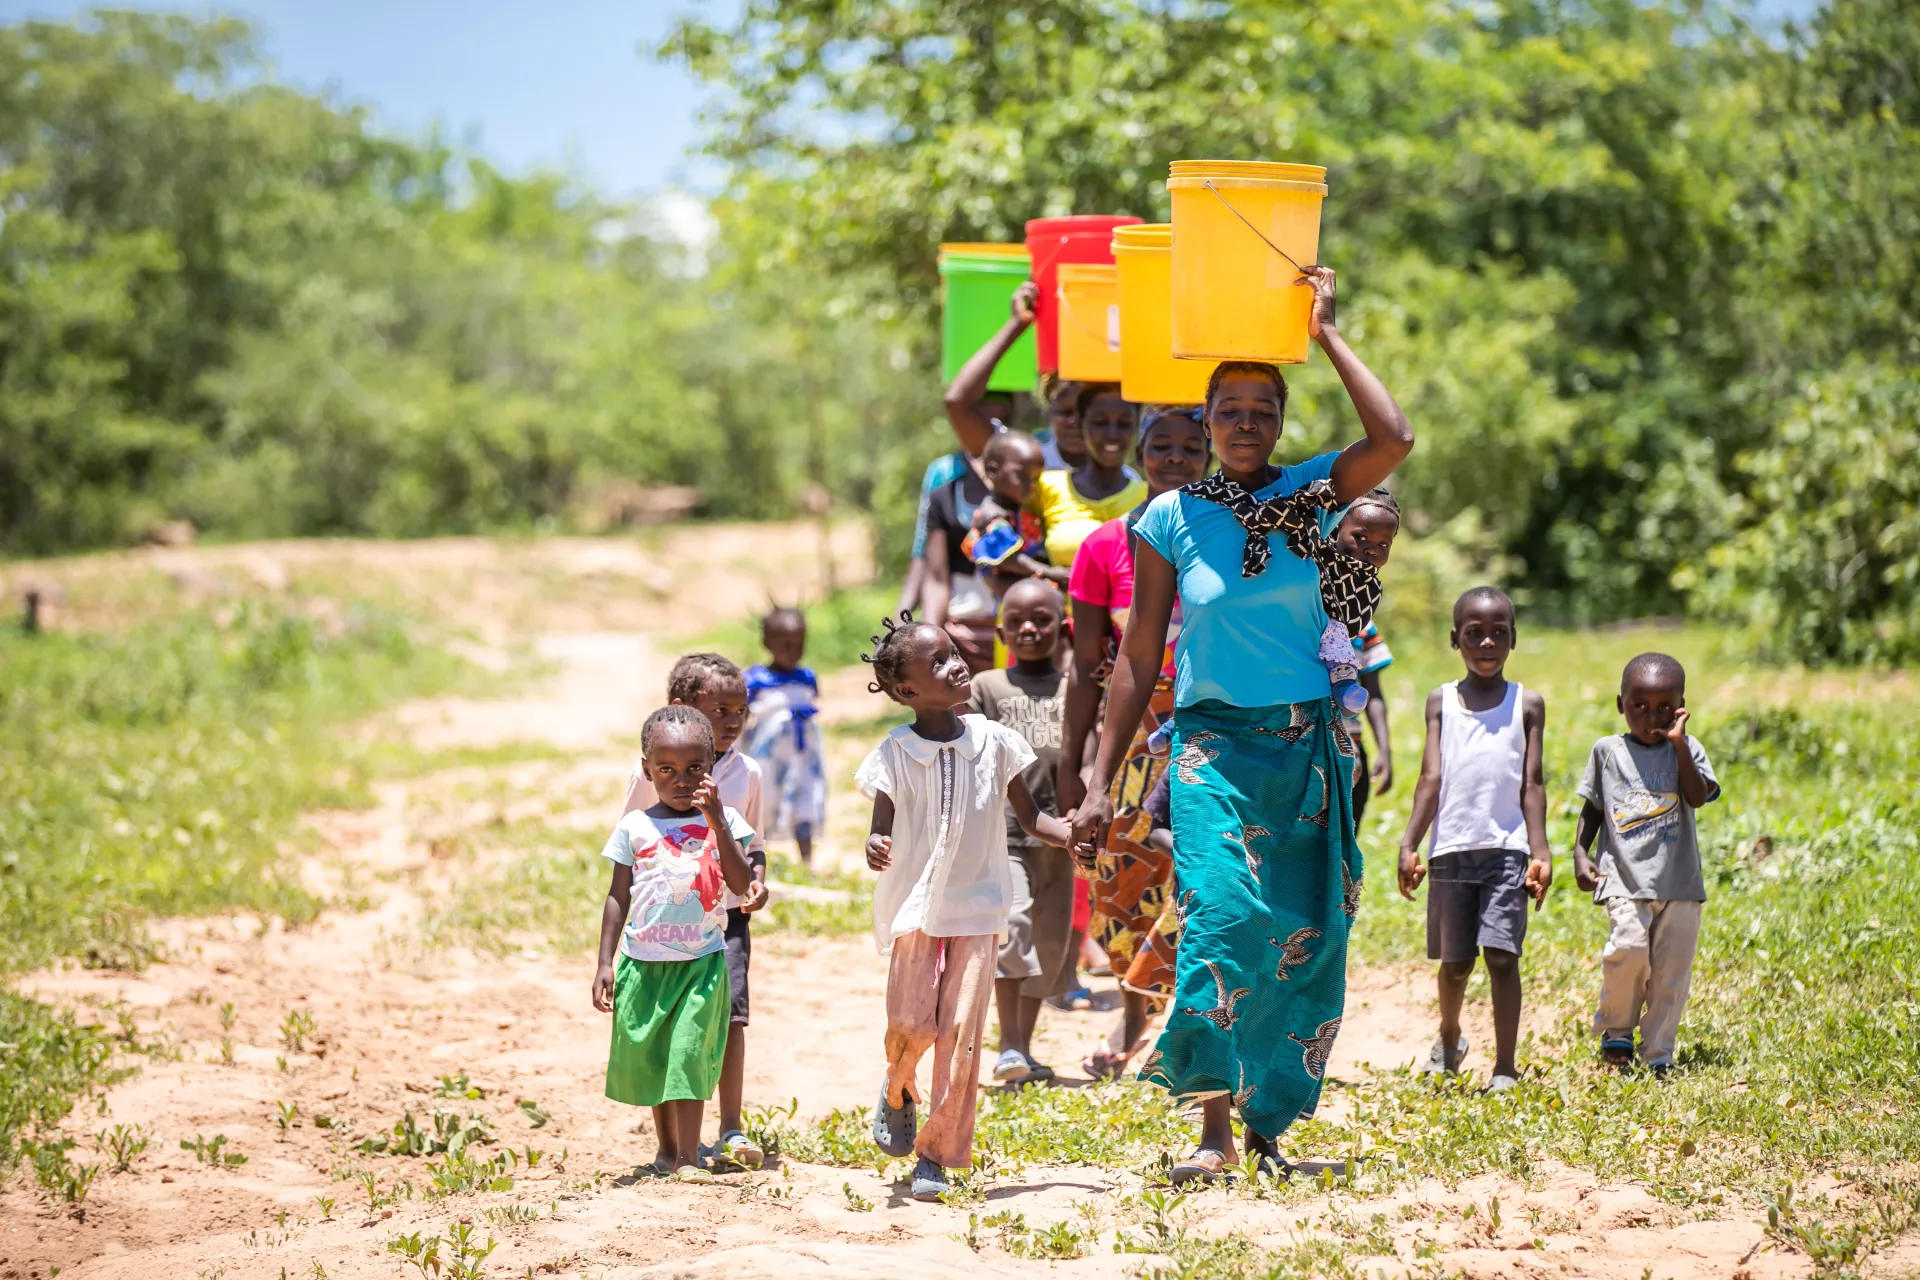 Women carrying buckets over their heads walk along with children to collect water in Zambia.